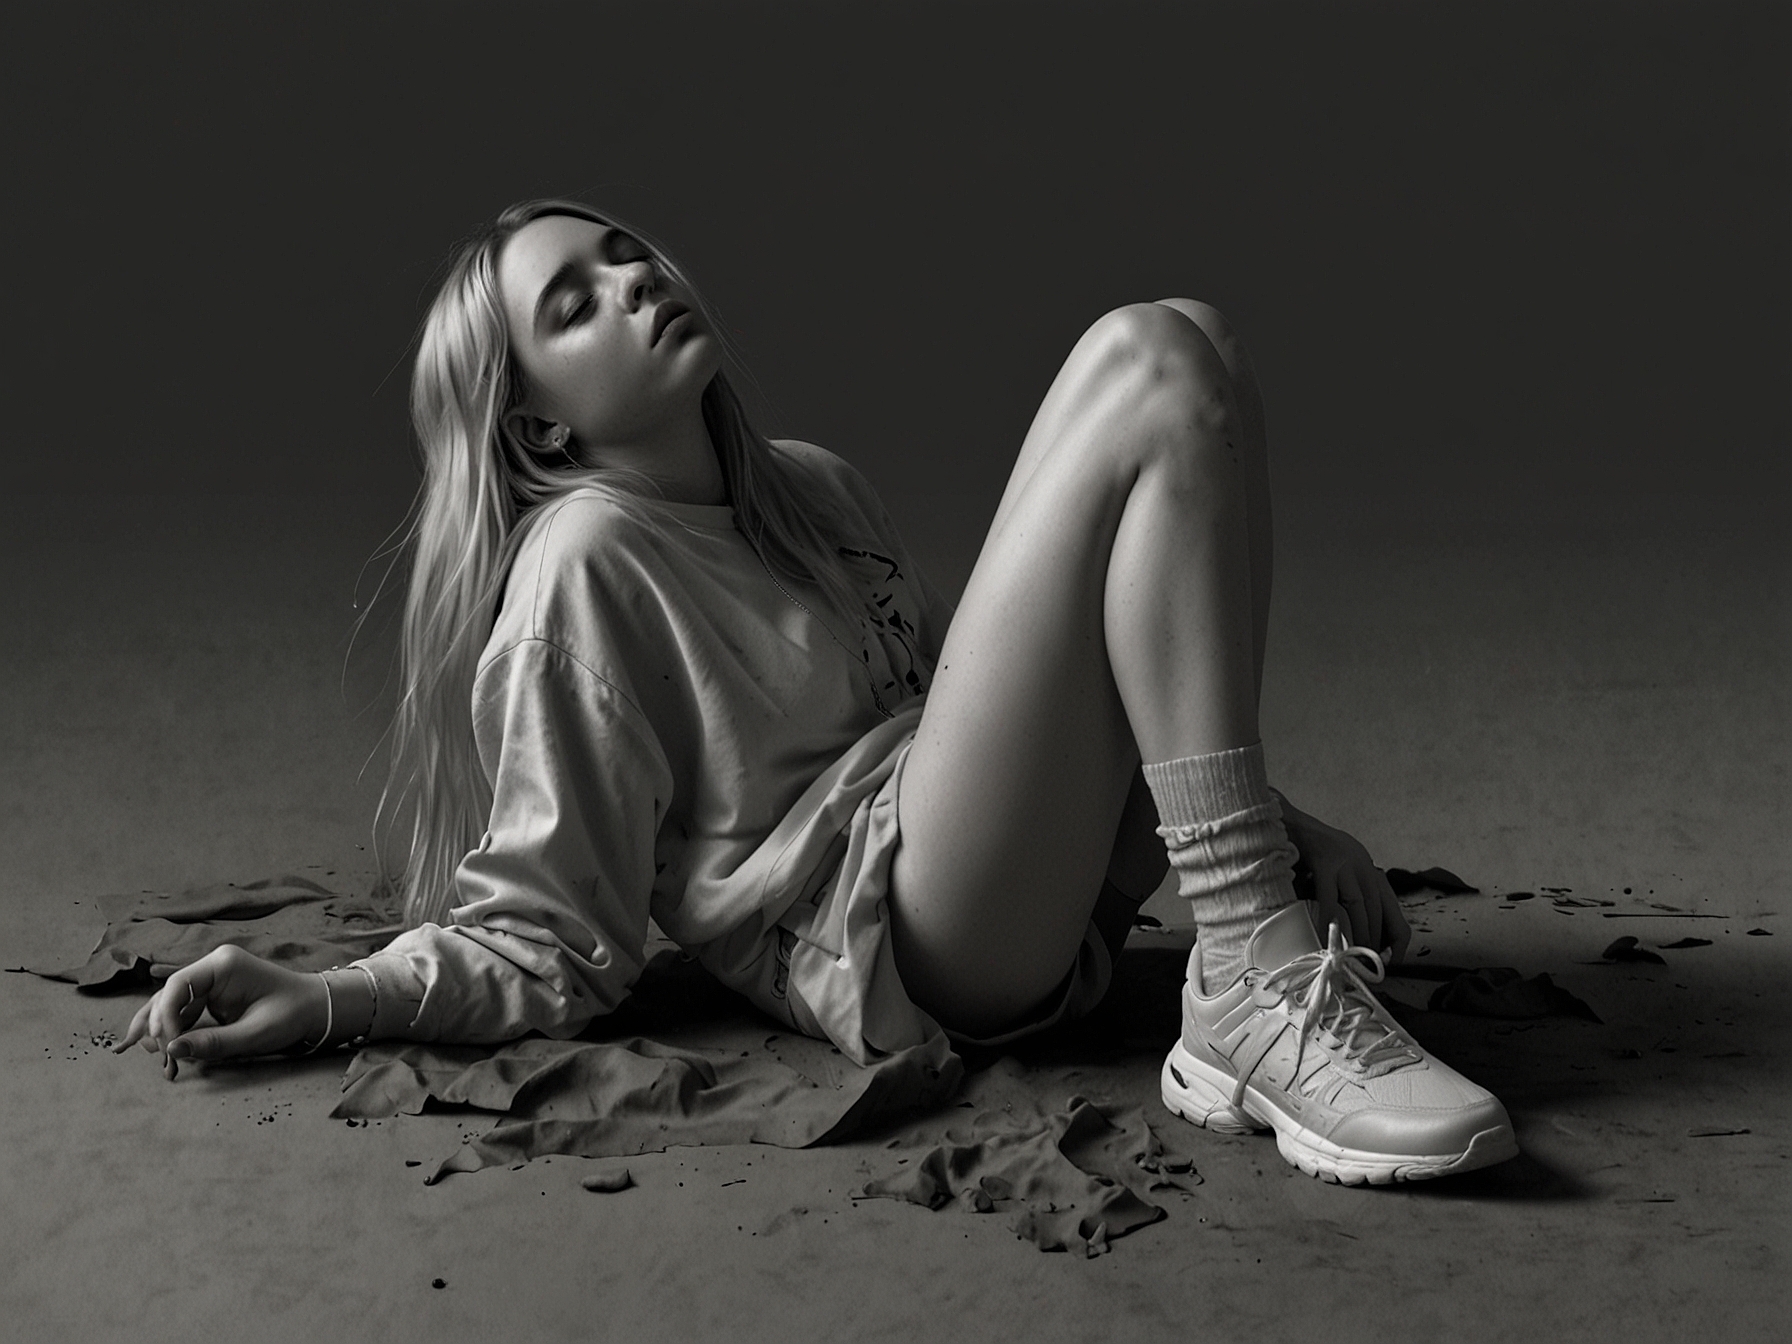 Cover art of 'Hit Me Hard And Soft' with Billie Eilish in an introspective pose. The image illustrates the emotional depth and innovative soundscapes of the album, highlighting her continued evolution as an artist.